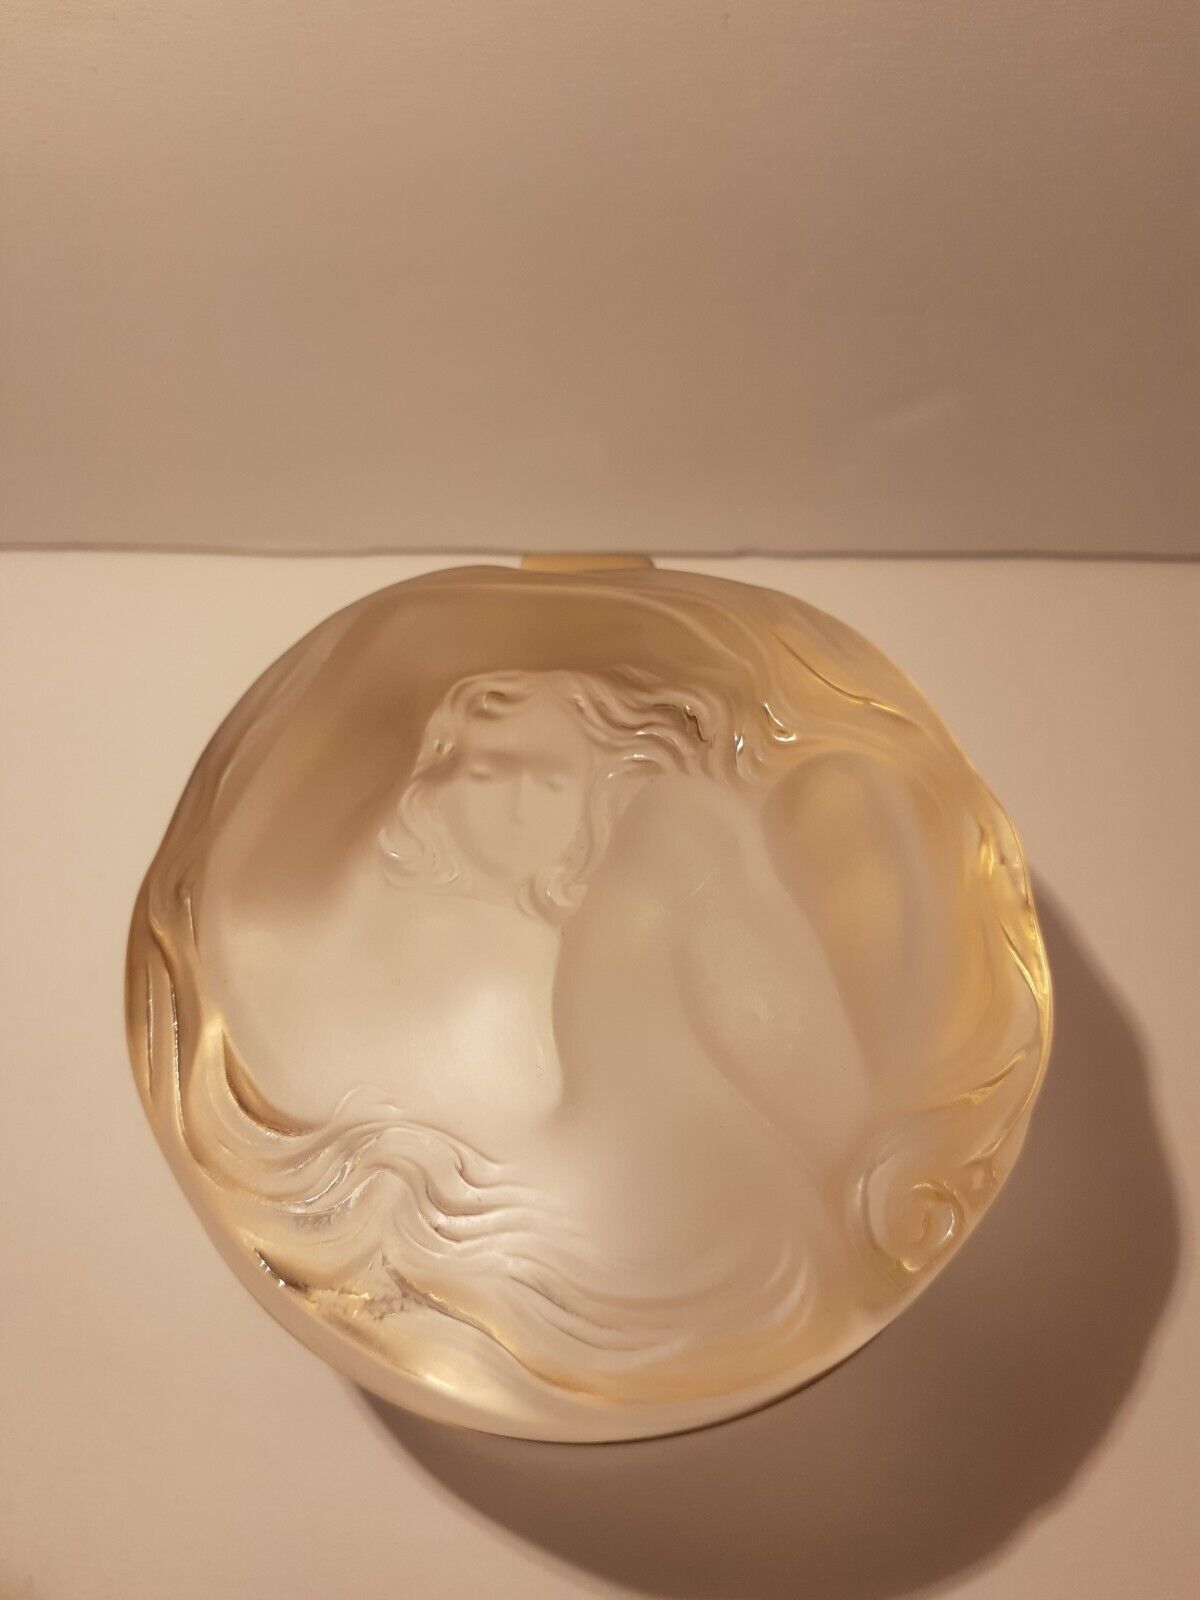 LALIQUE CRYSTAL DAPHNE NUDE WOMAN DRESSER BOX Art glass in EXCELLENT CONDITION